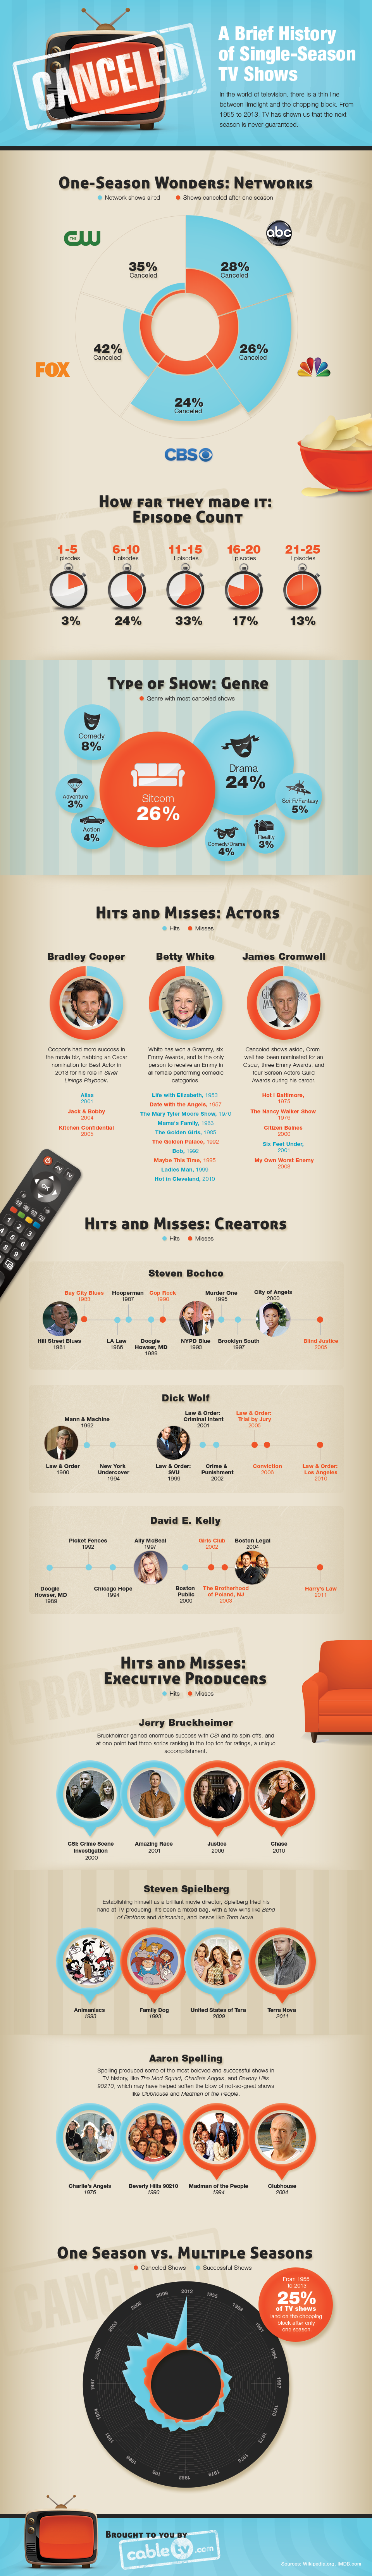 Why Most TV Shows Gets Cancelled After One Season [Infographic]